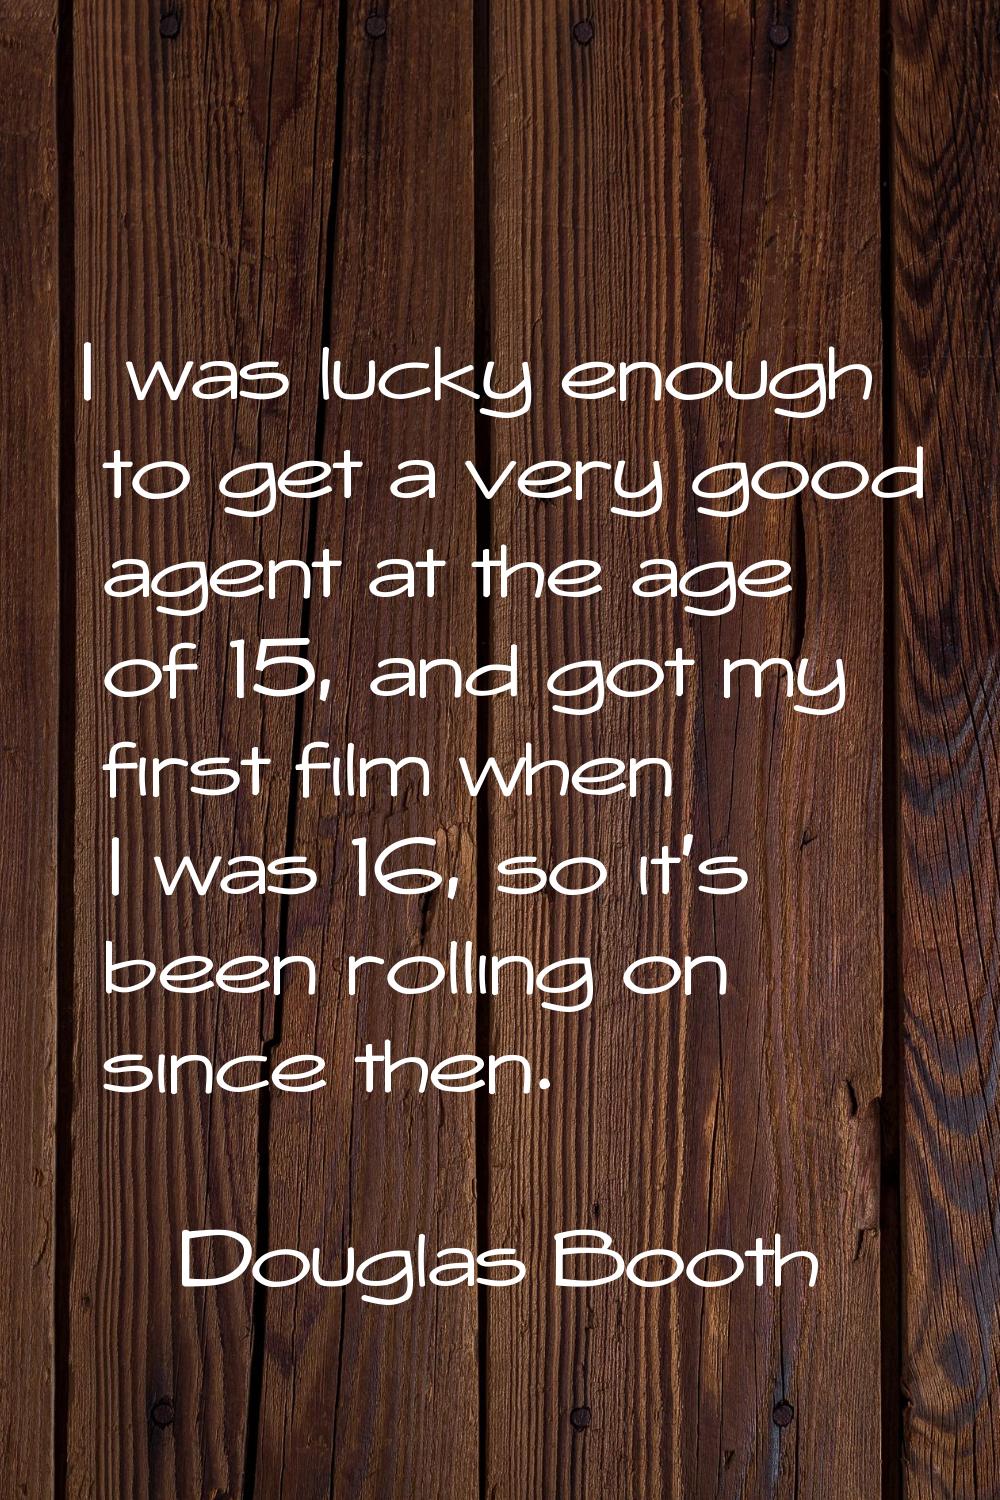 I was lucky enough to get a very good agent at the age of 15, and got my first film when I was 16, 